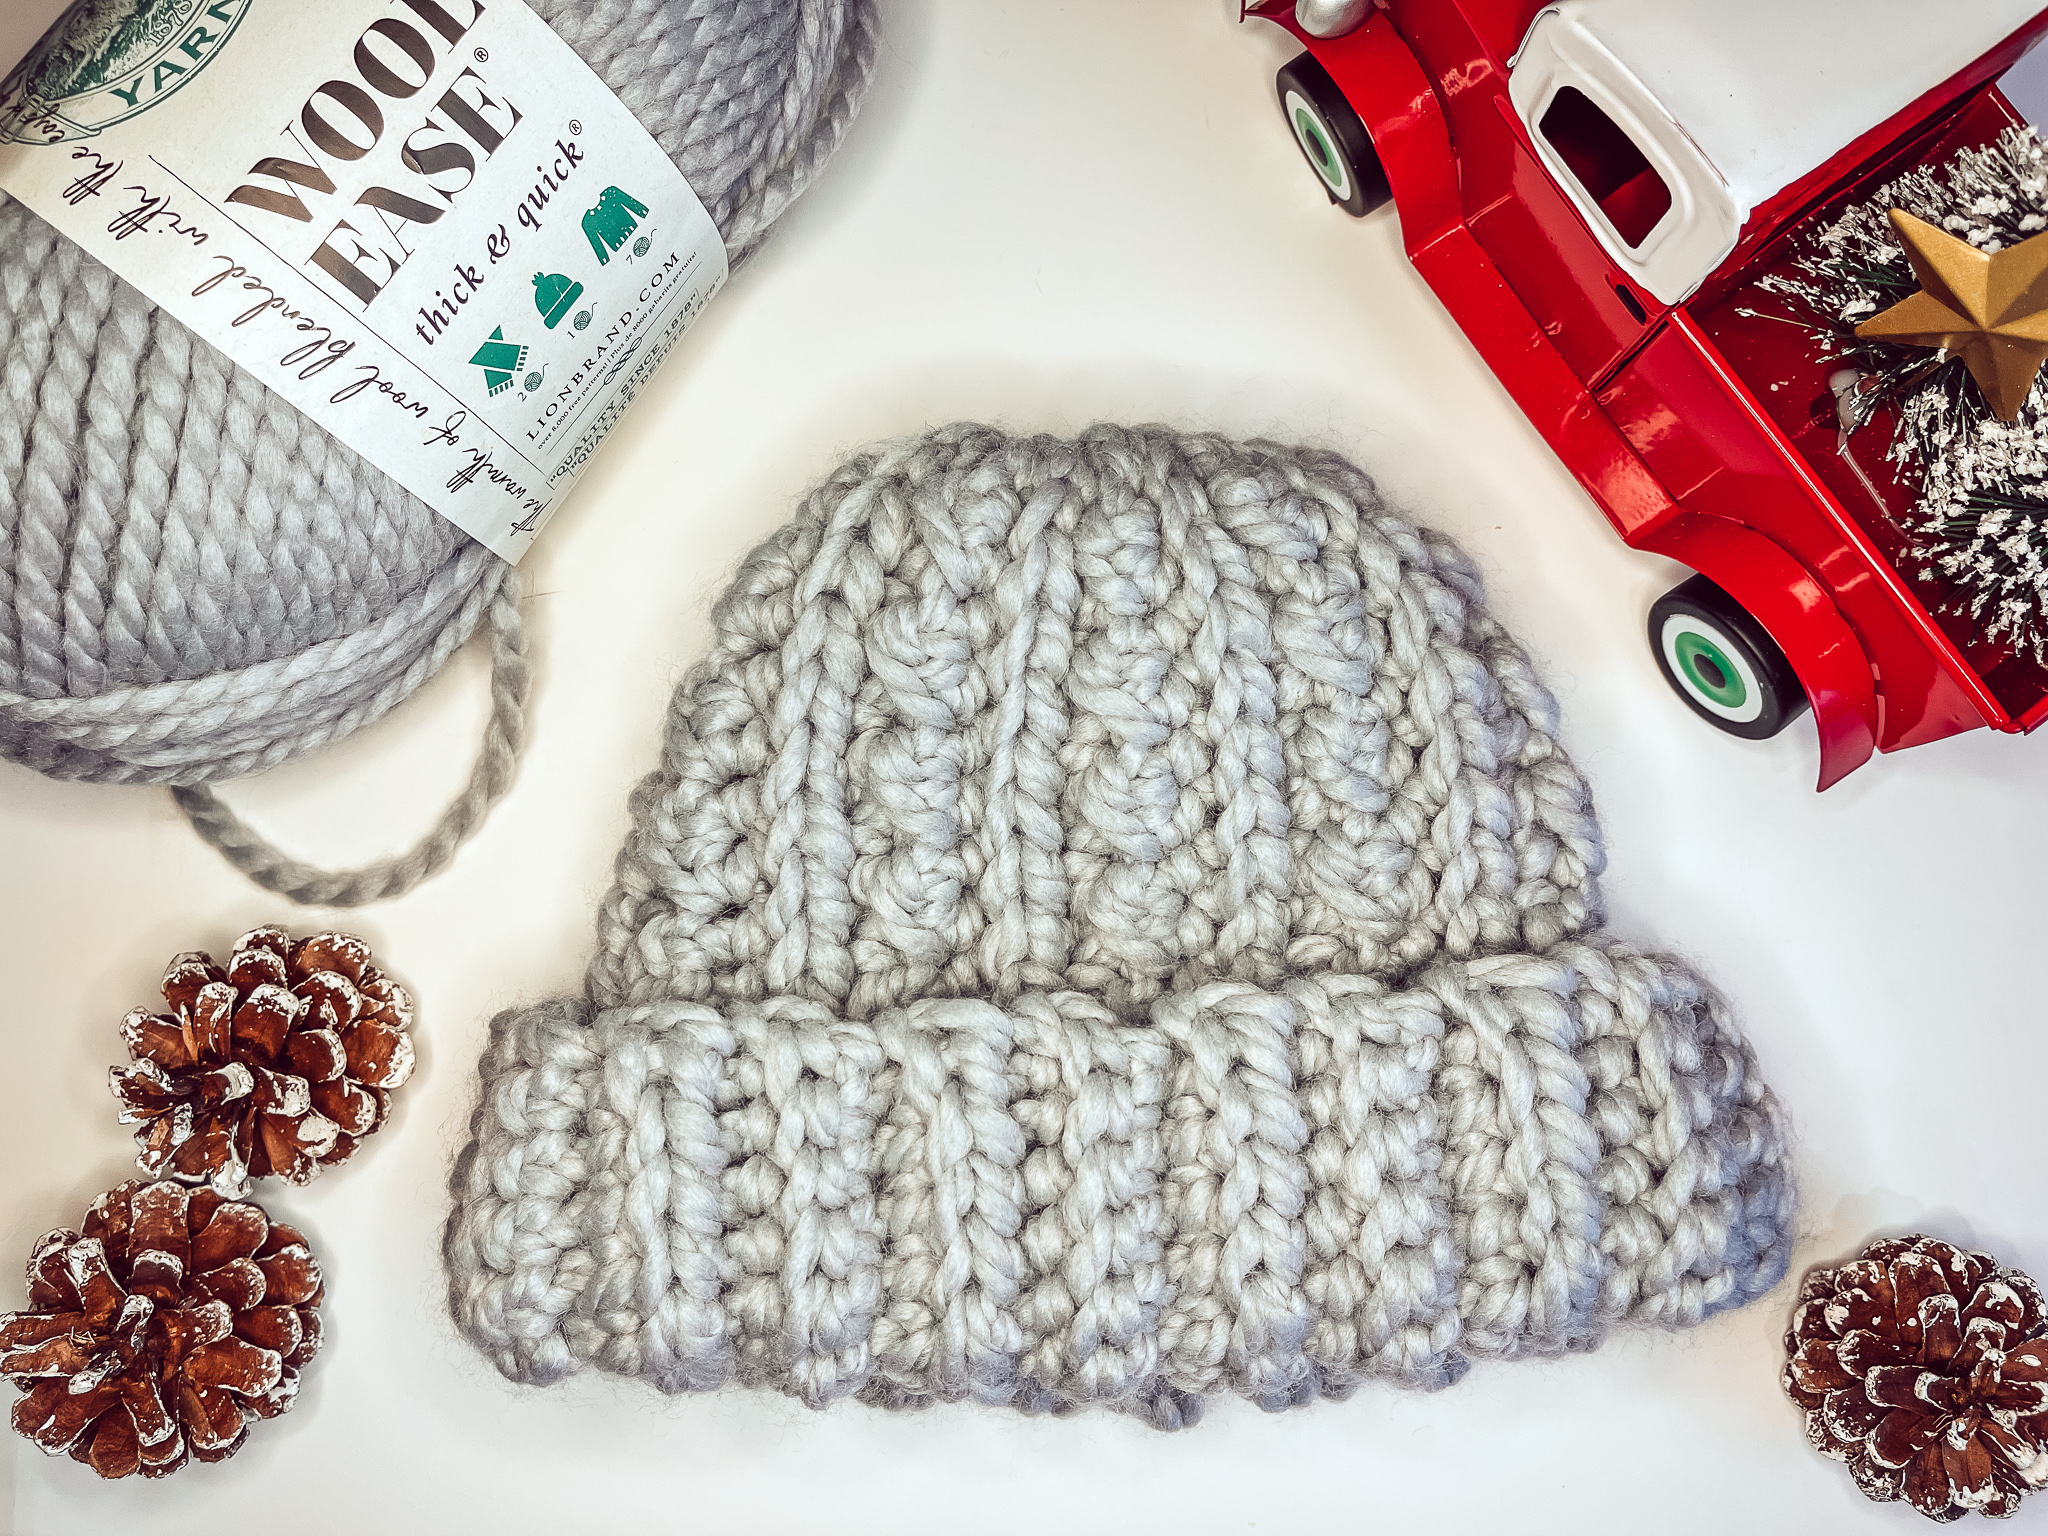 A gray, textured chunky crochet beanie is laying flat on a white background surrounded by pinecones, a toy red truck, and a ball of gray wool-ease quick and thick yarn.